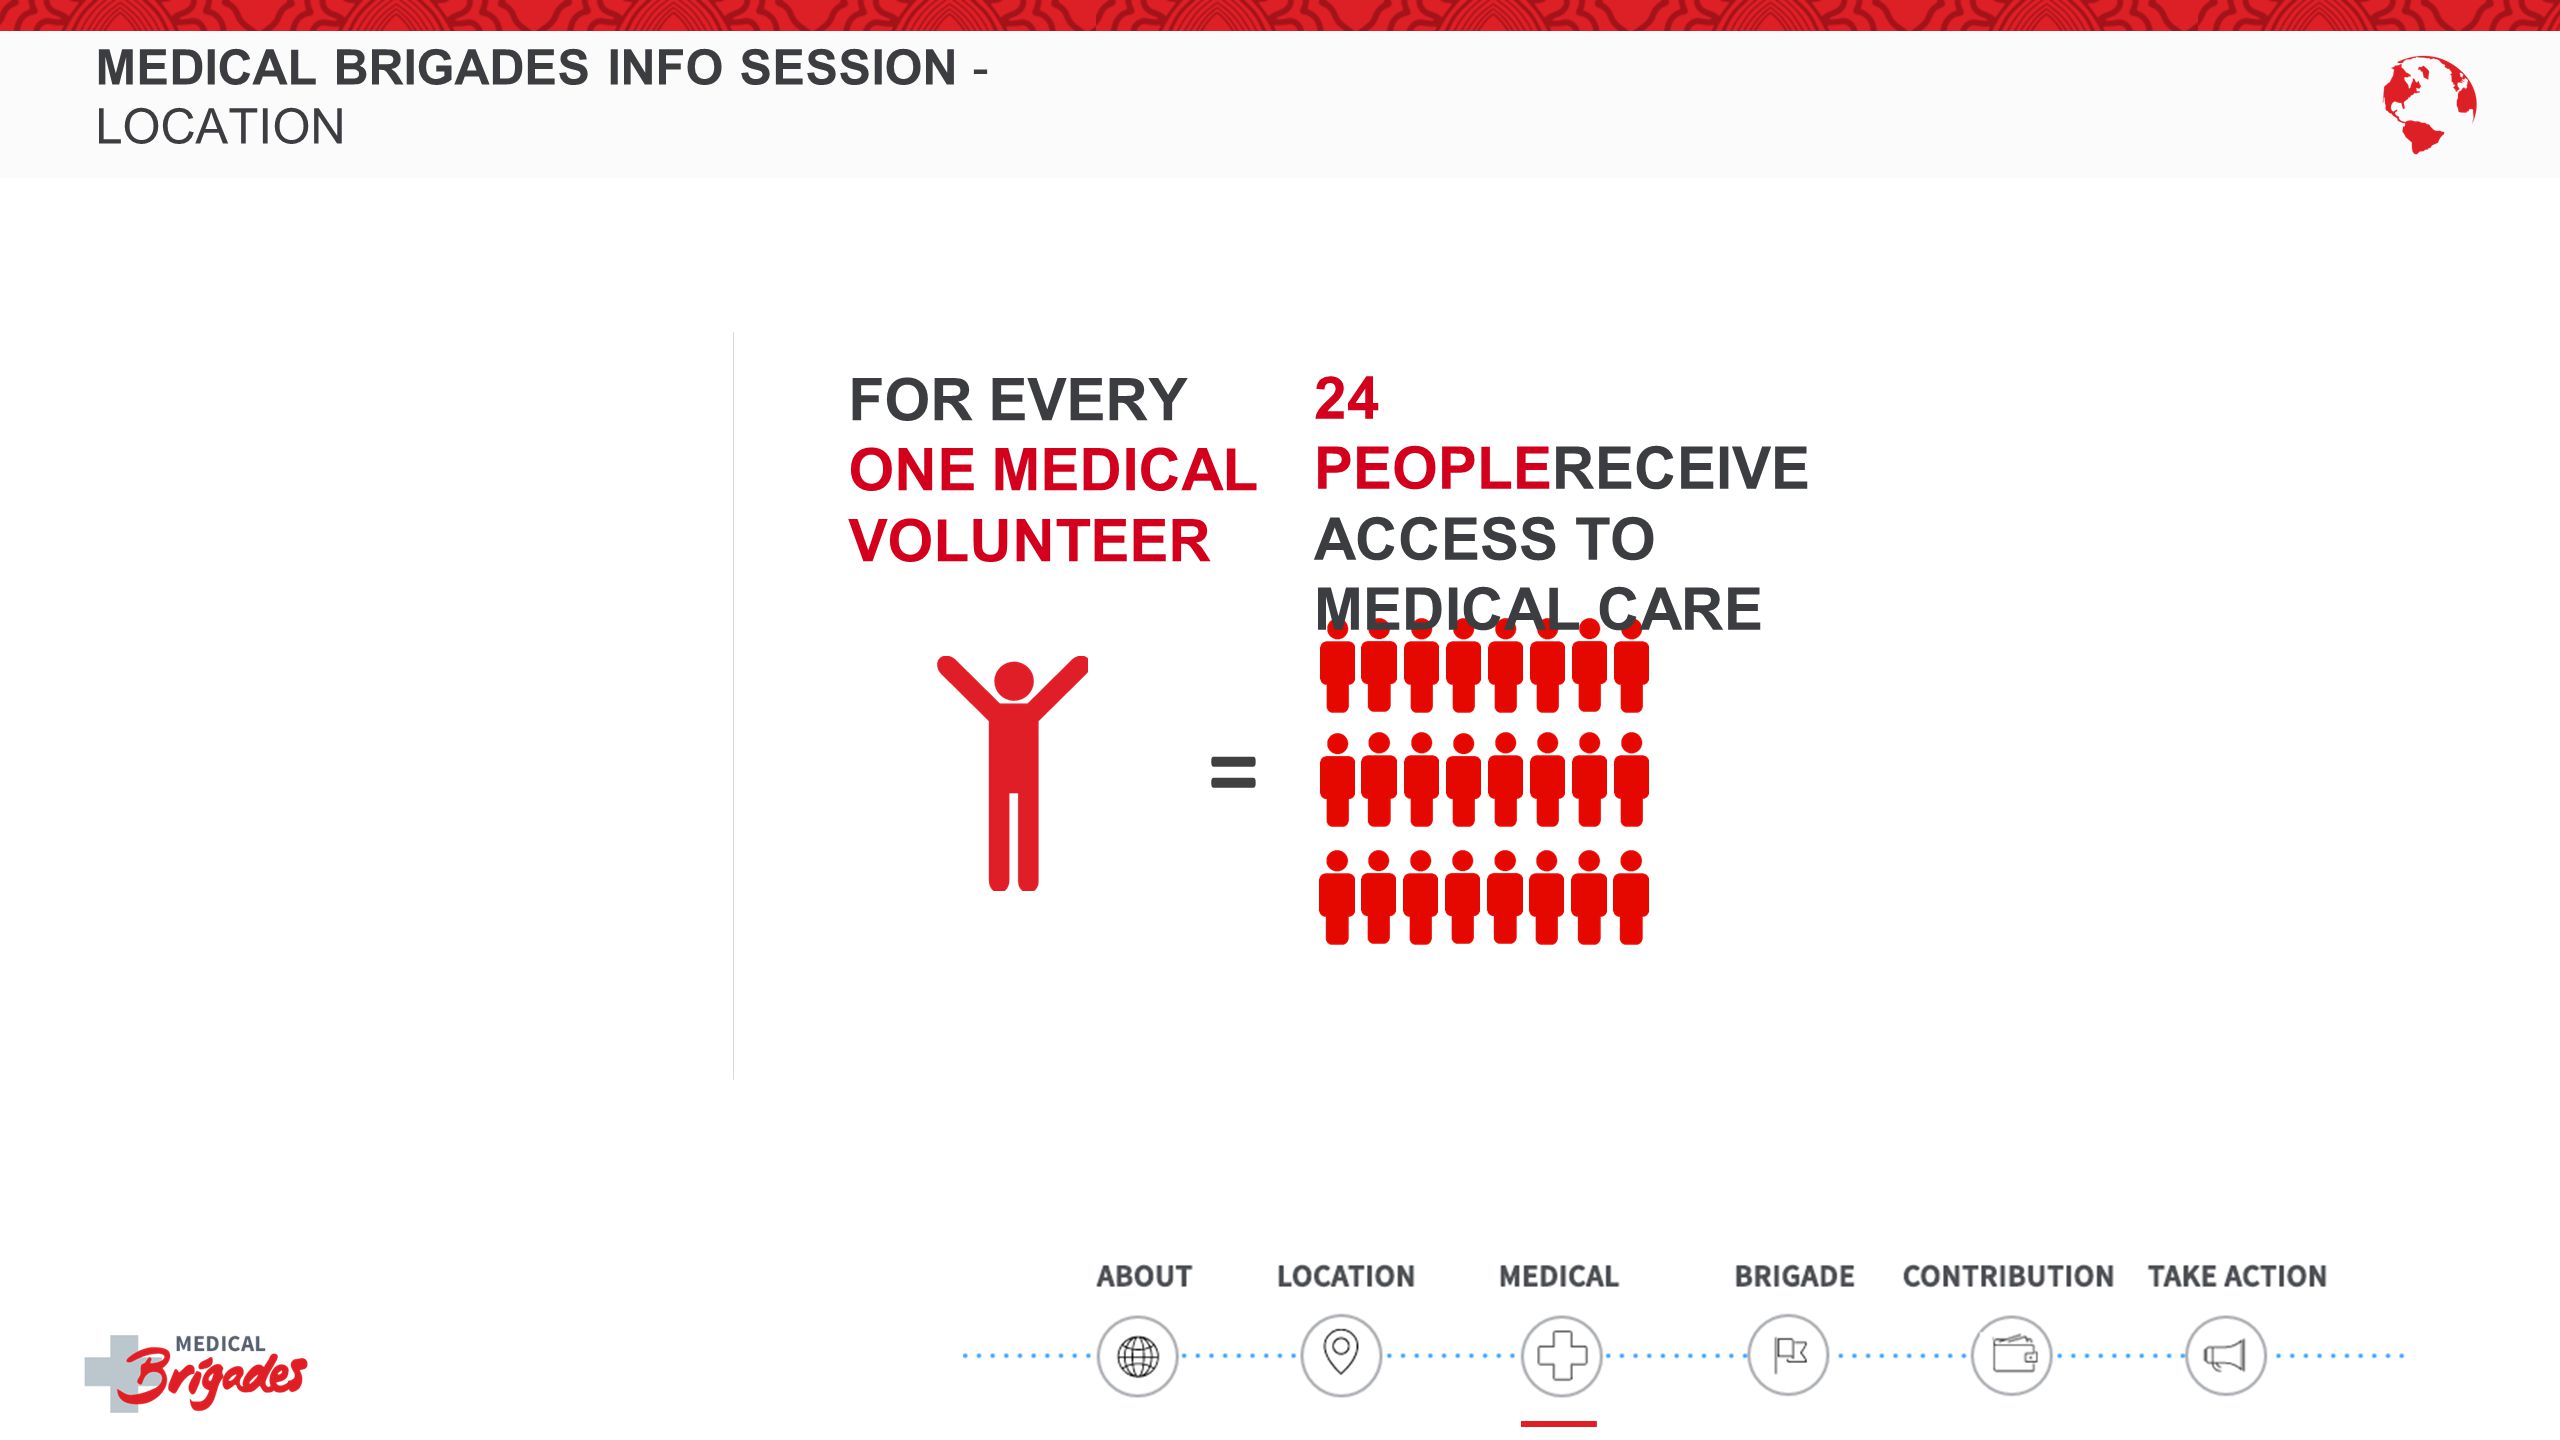 MEDICAL BRIGADES INFO SESSION - LOCATION = FOR EVERY ONE MEDICAL VOLUNTEER 24 PEOPLERECEIVE ACCESS TO MEDICAL CARE